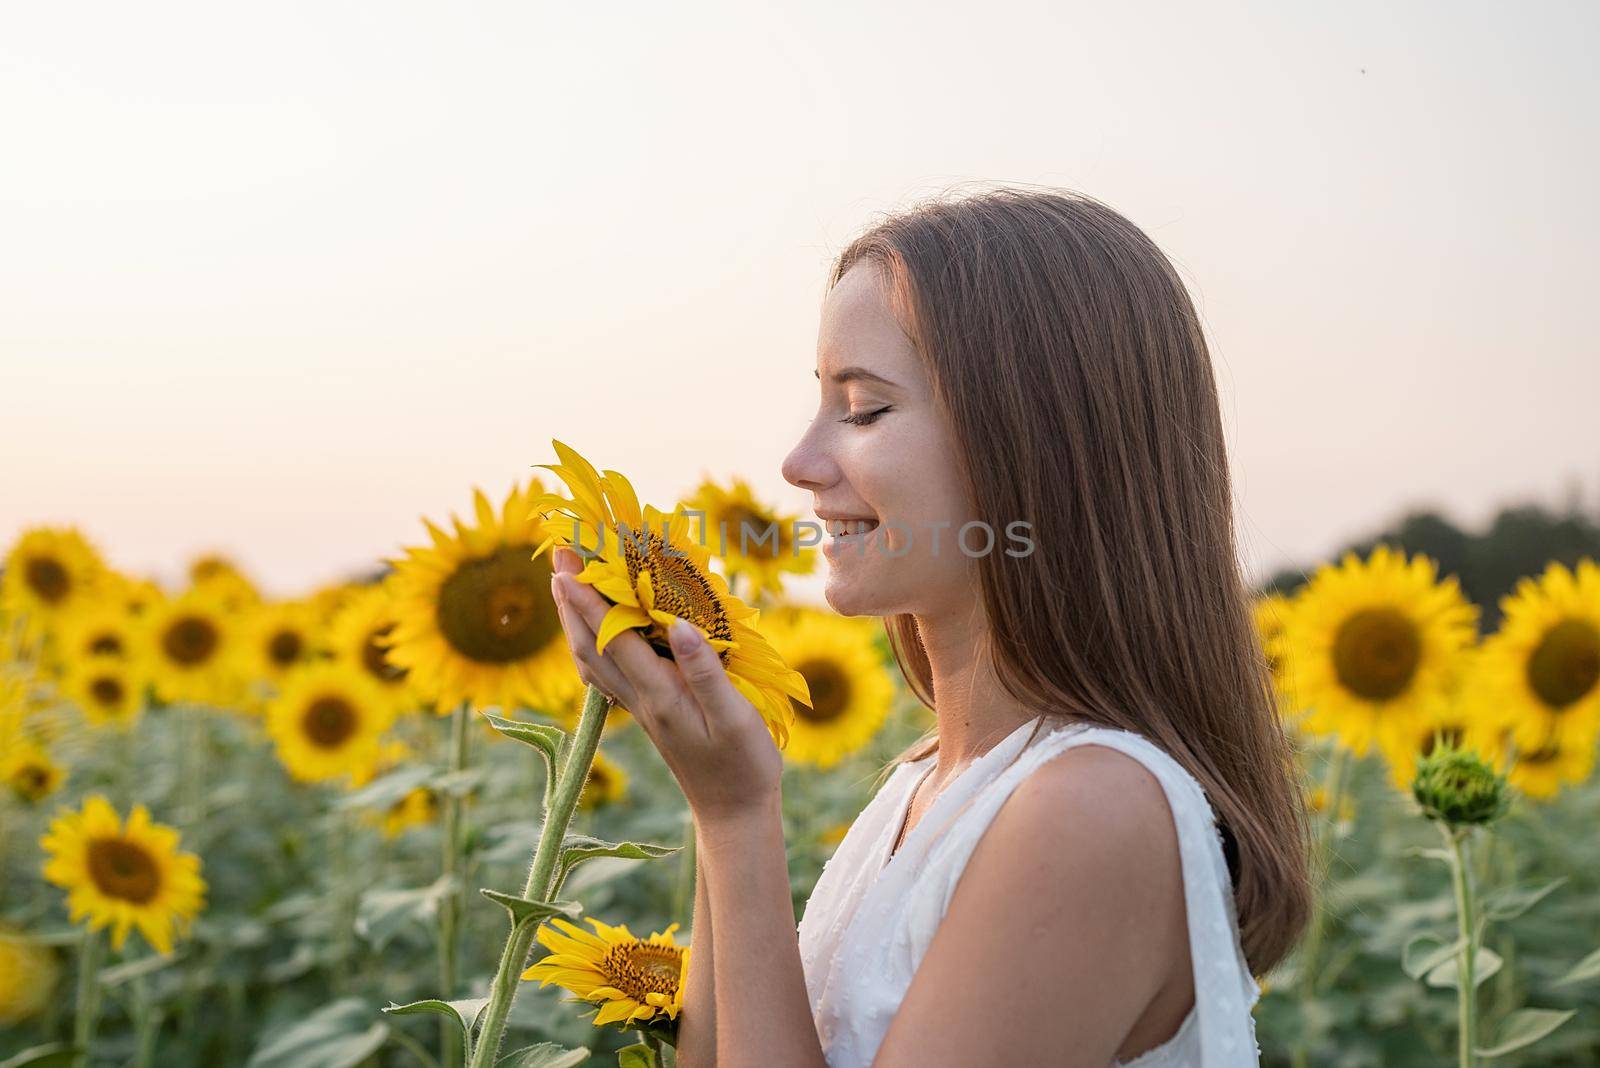 Freedom concept. Autumn nature. Girl in white dress smelling a sunflower blossom.